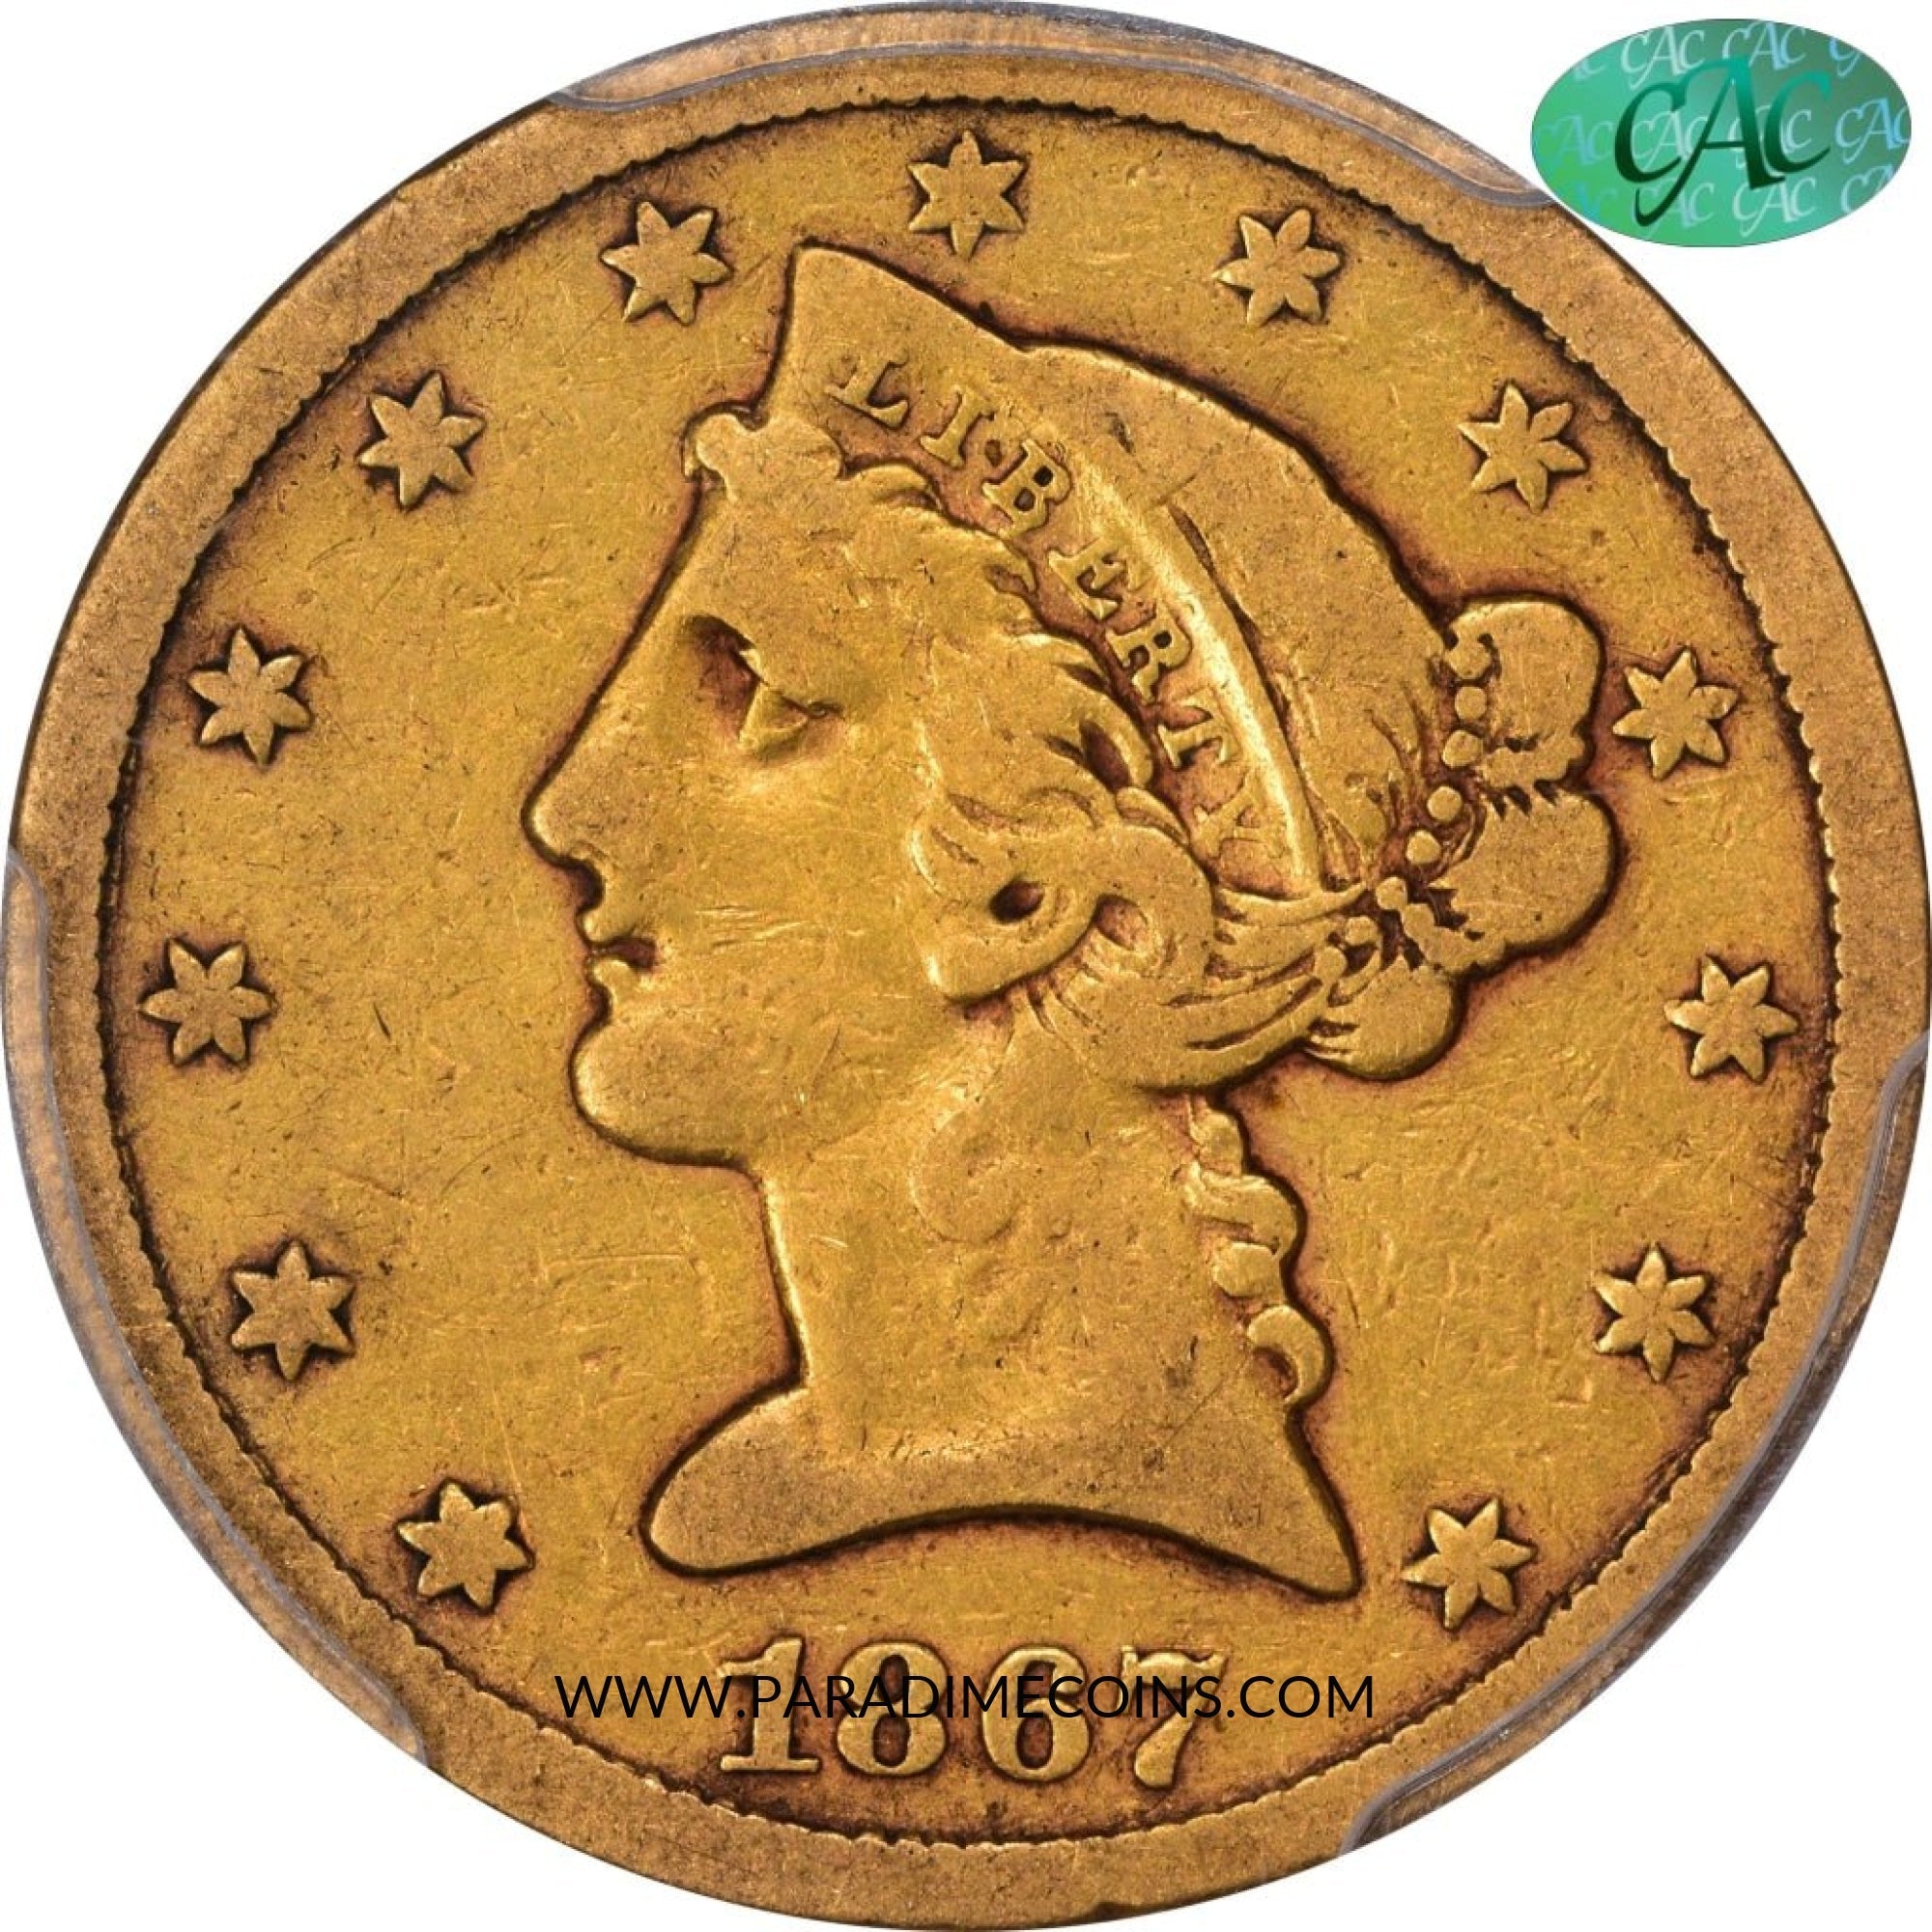 1867-S $5 F15 PCGS CAC - Paradime Coins | PCGS NGC CACG CAC Rare US Numismatic Coins For Sale